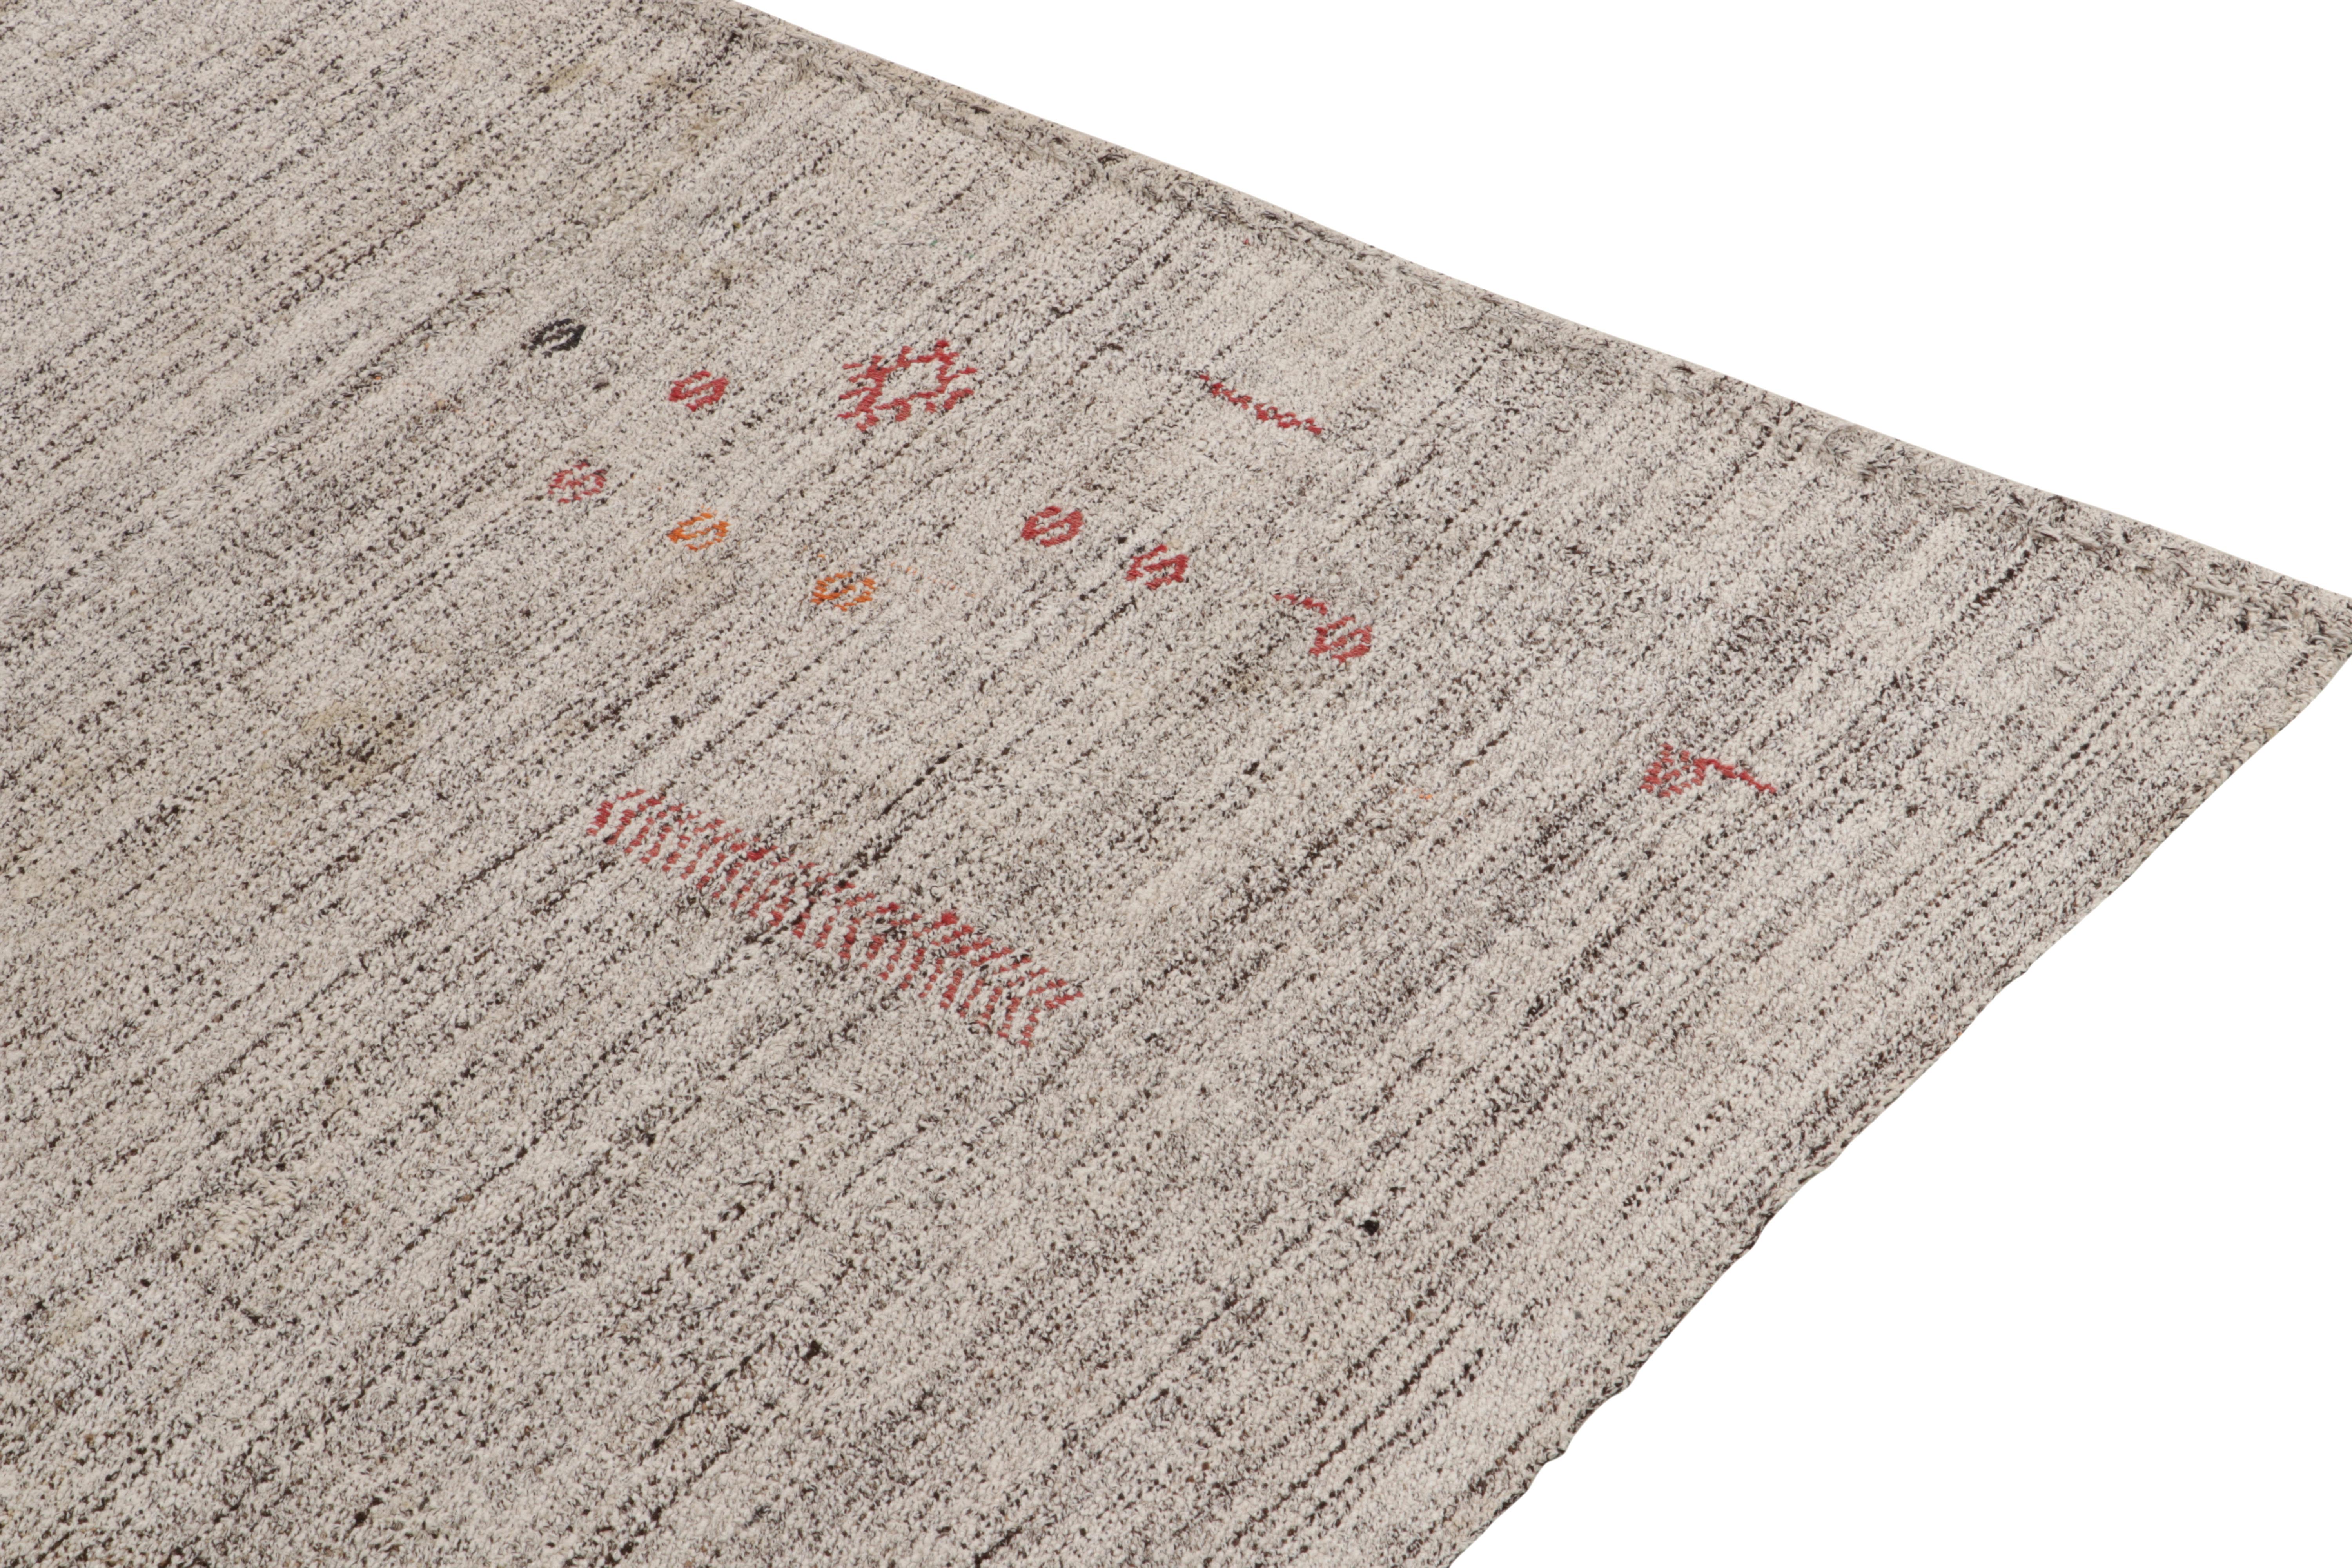 Turkish Rug & Kilim's Modern Kilim Striped Beige Gray and Green Transitional Flat-Weave For Sale